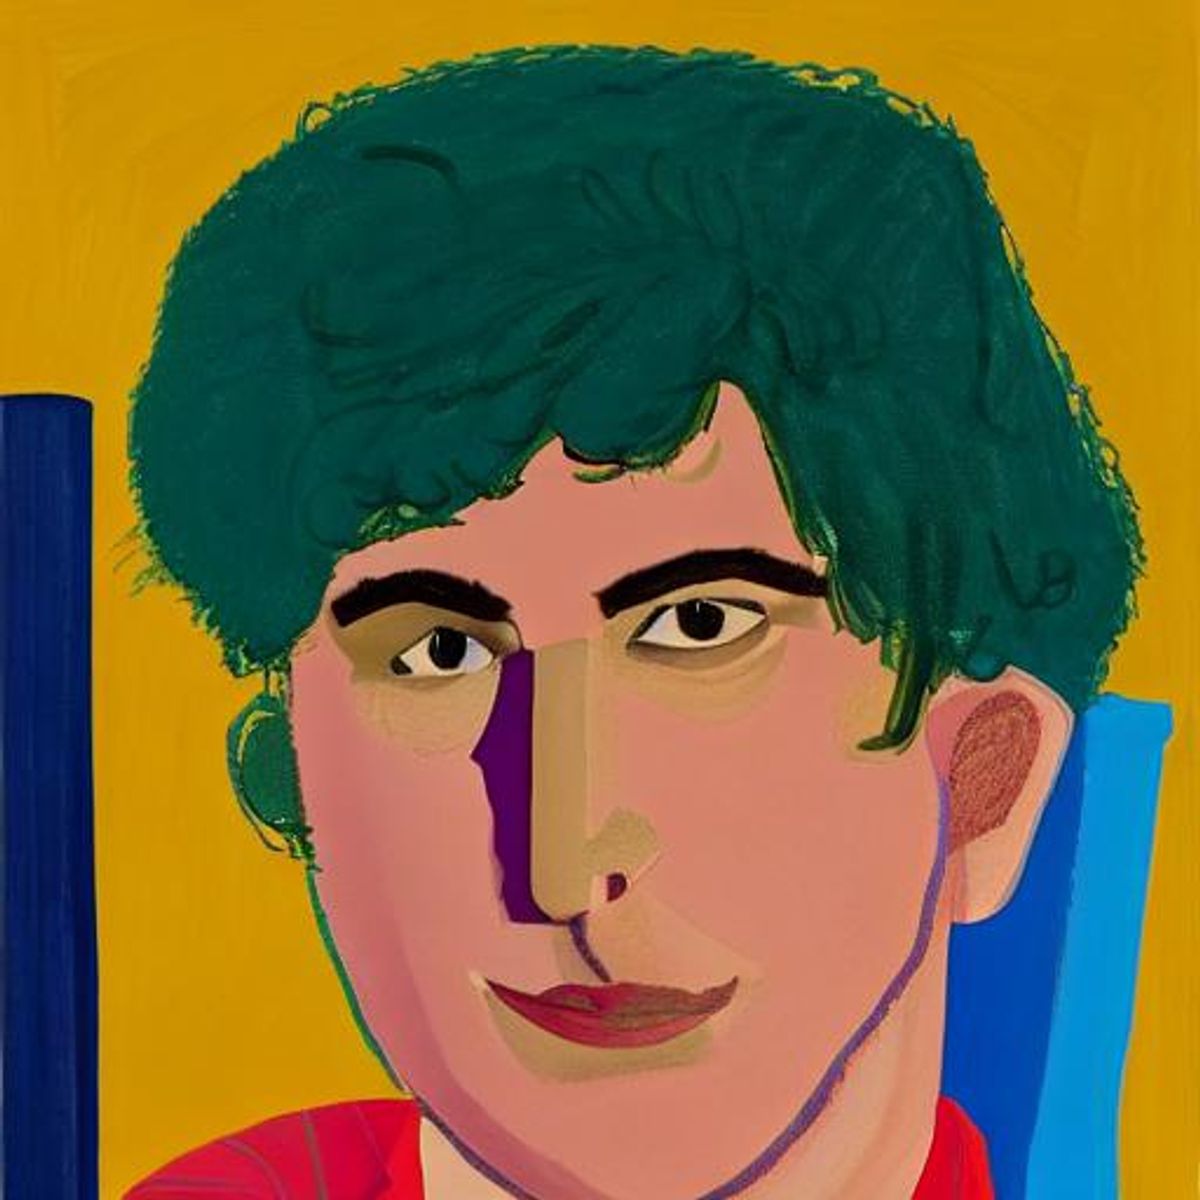 Stable Diffusion’s AI portrait of Bendor Grosvenor in the manner of David Hockney


